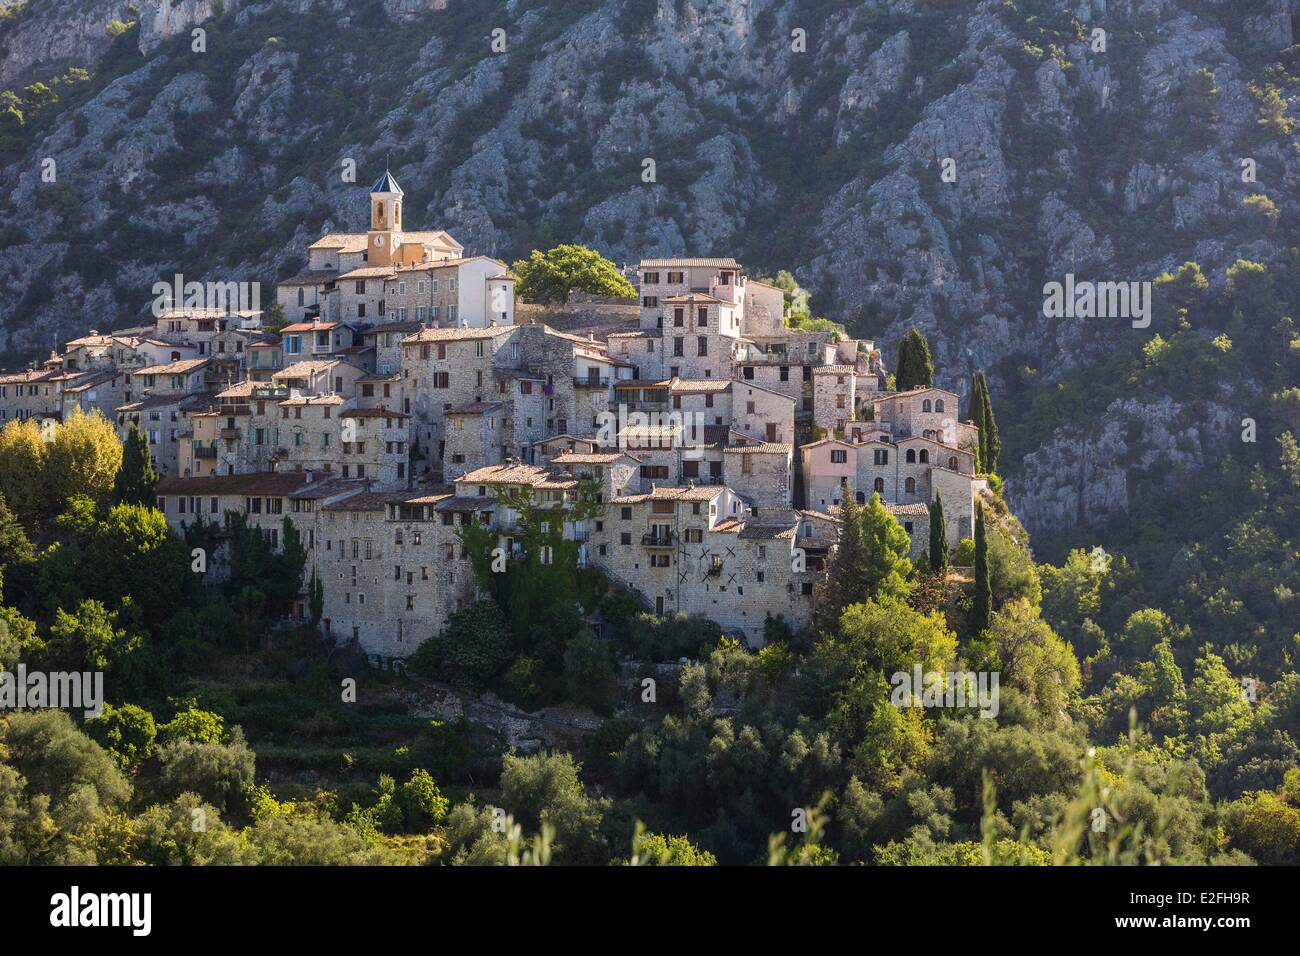 France, Alpes Maritimes, perched village of Peillon in Nice Hinterland Stock Photo